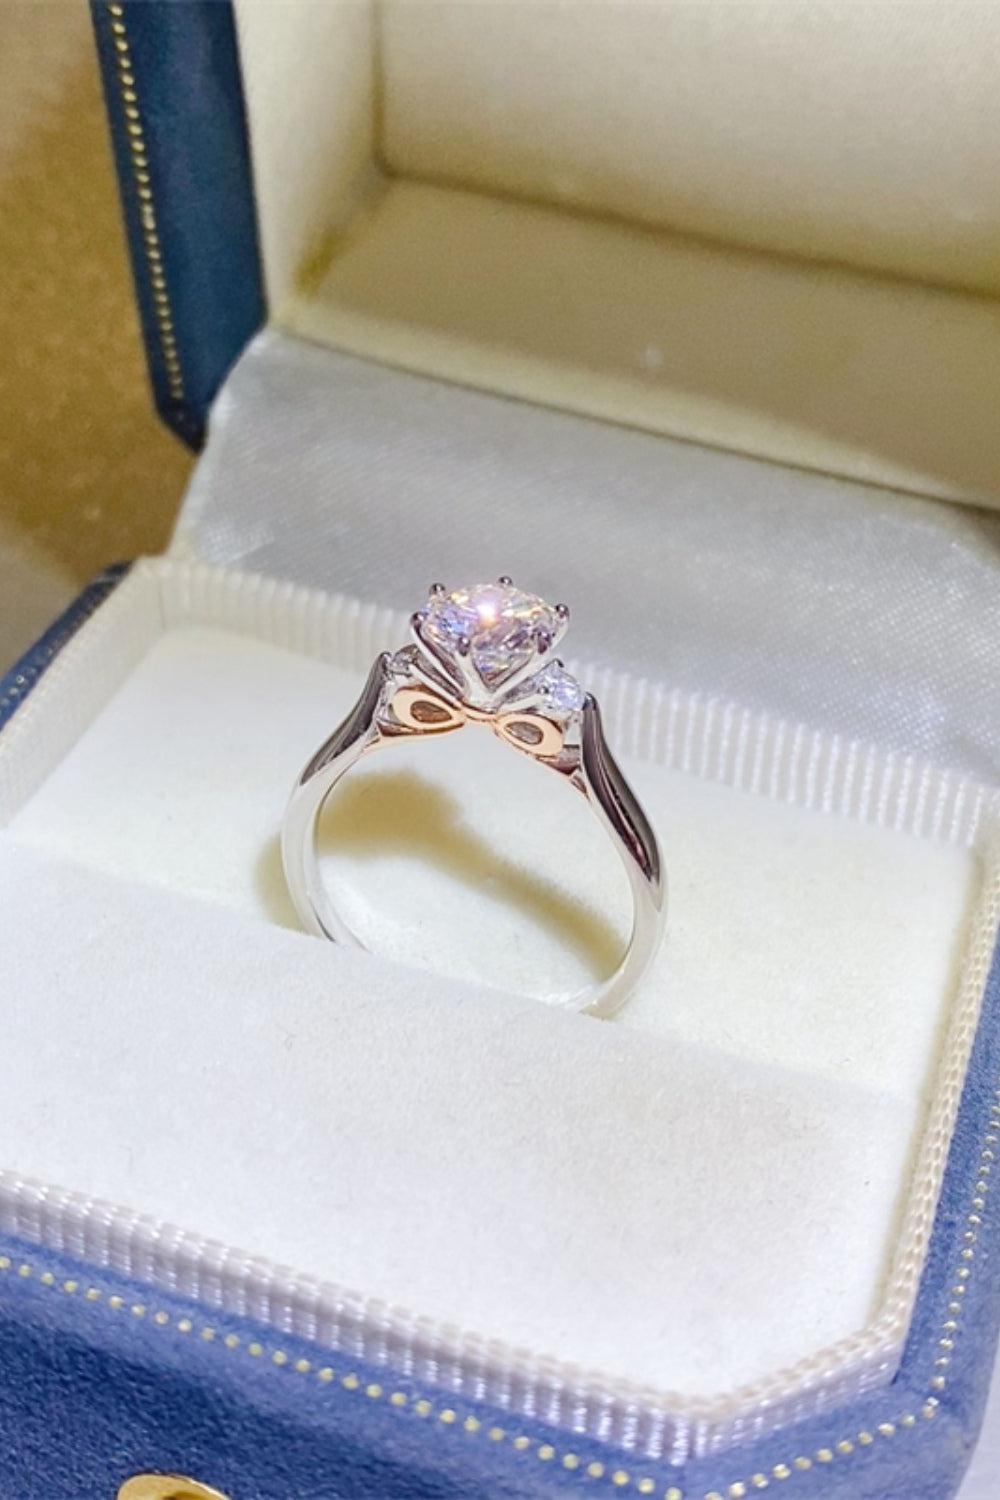 a diamond ring in a blue box on a table